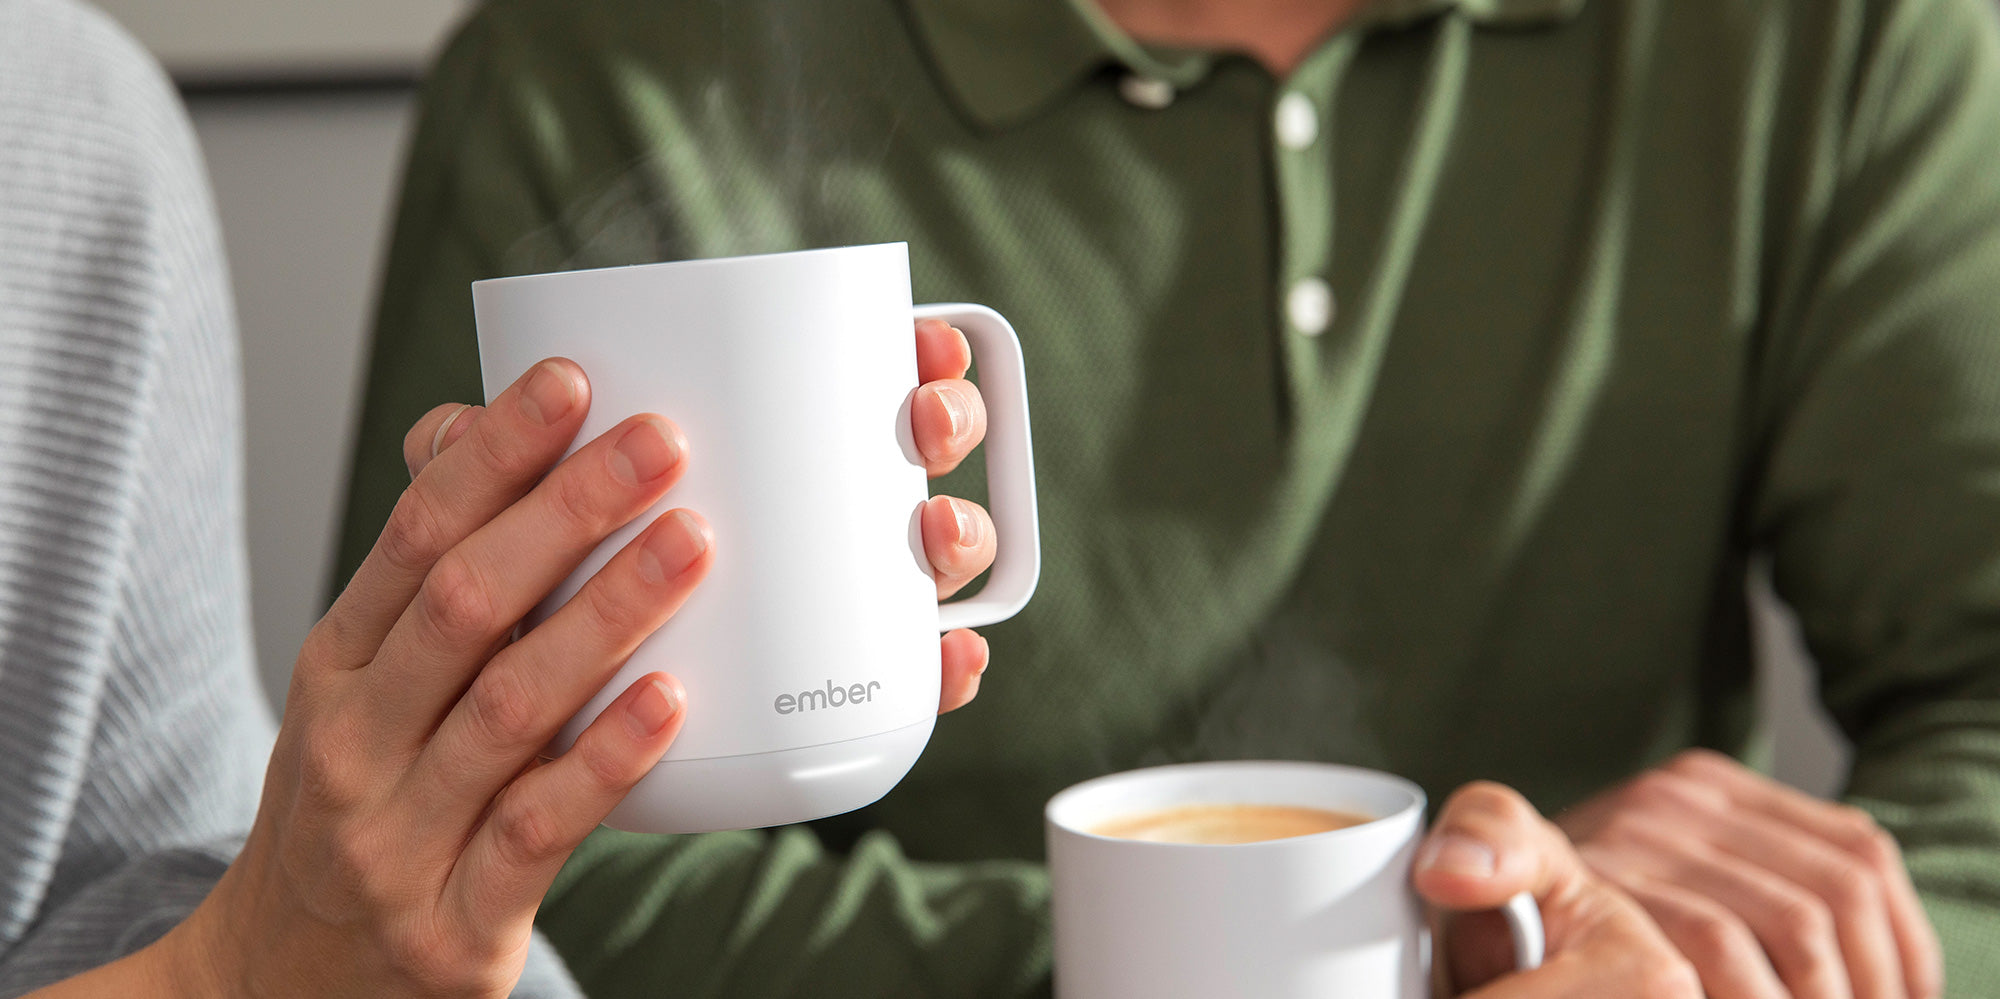 How to Keep Coffee Hot - Ember®